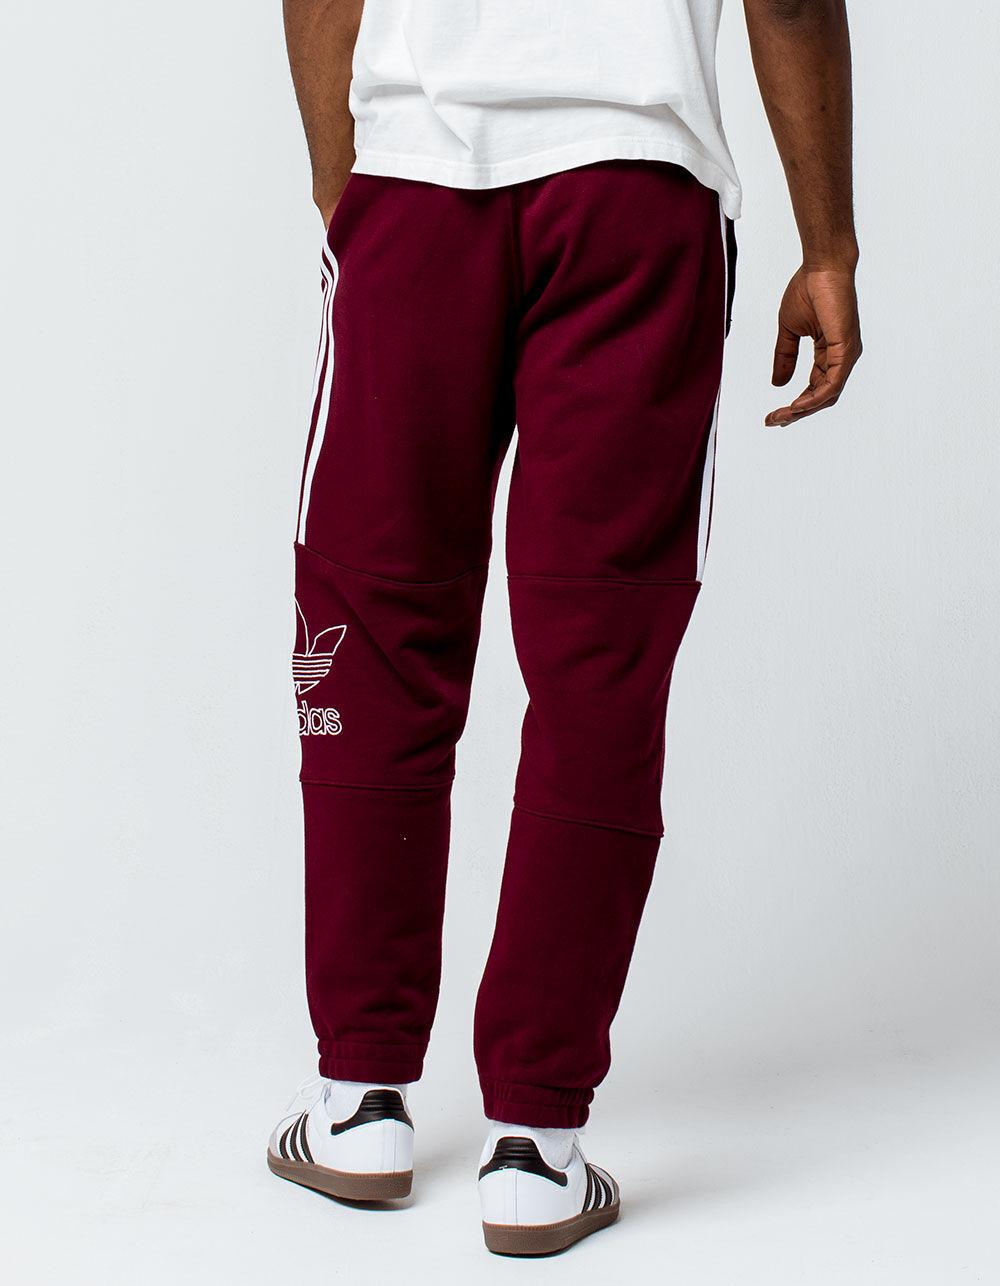 adidas Cotton Outline Maroon Mens Sweatpants in Red for Men - Lyst